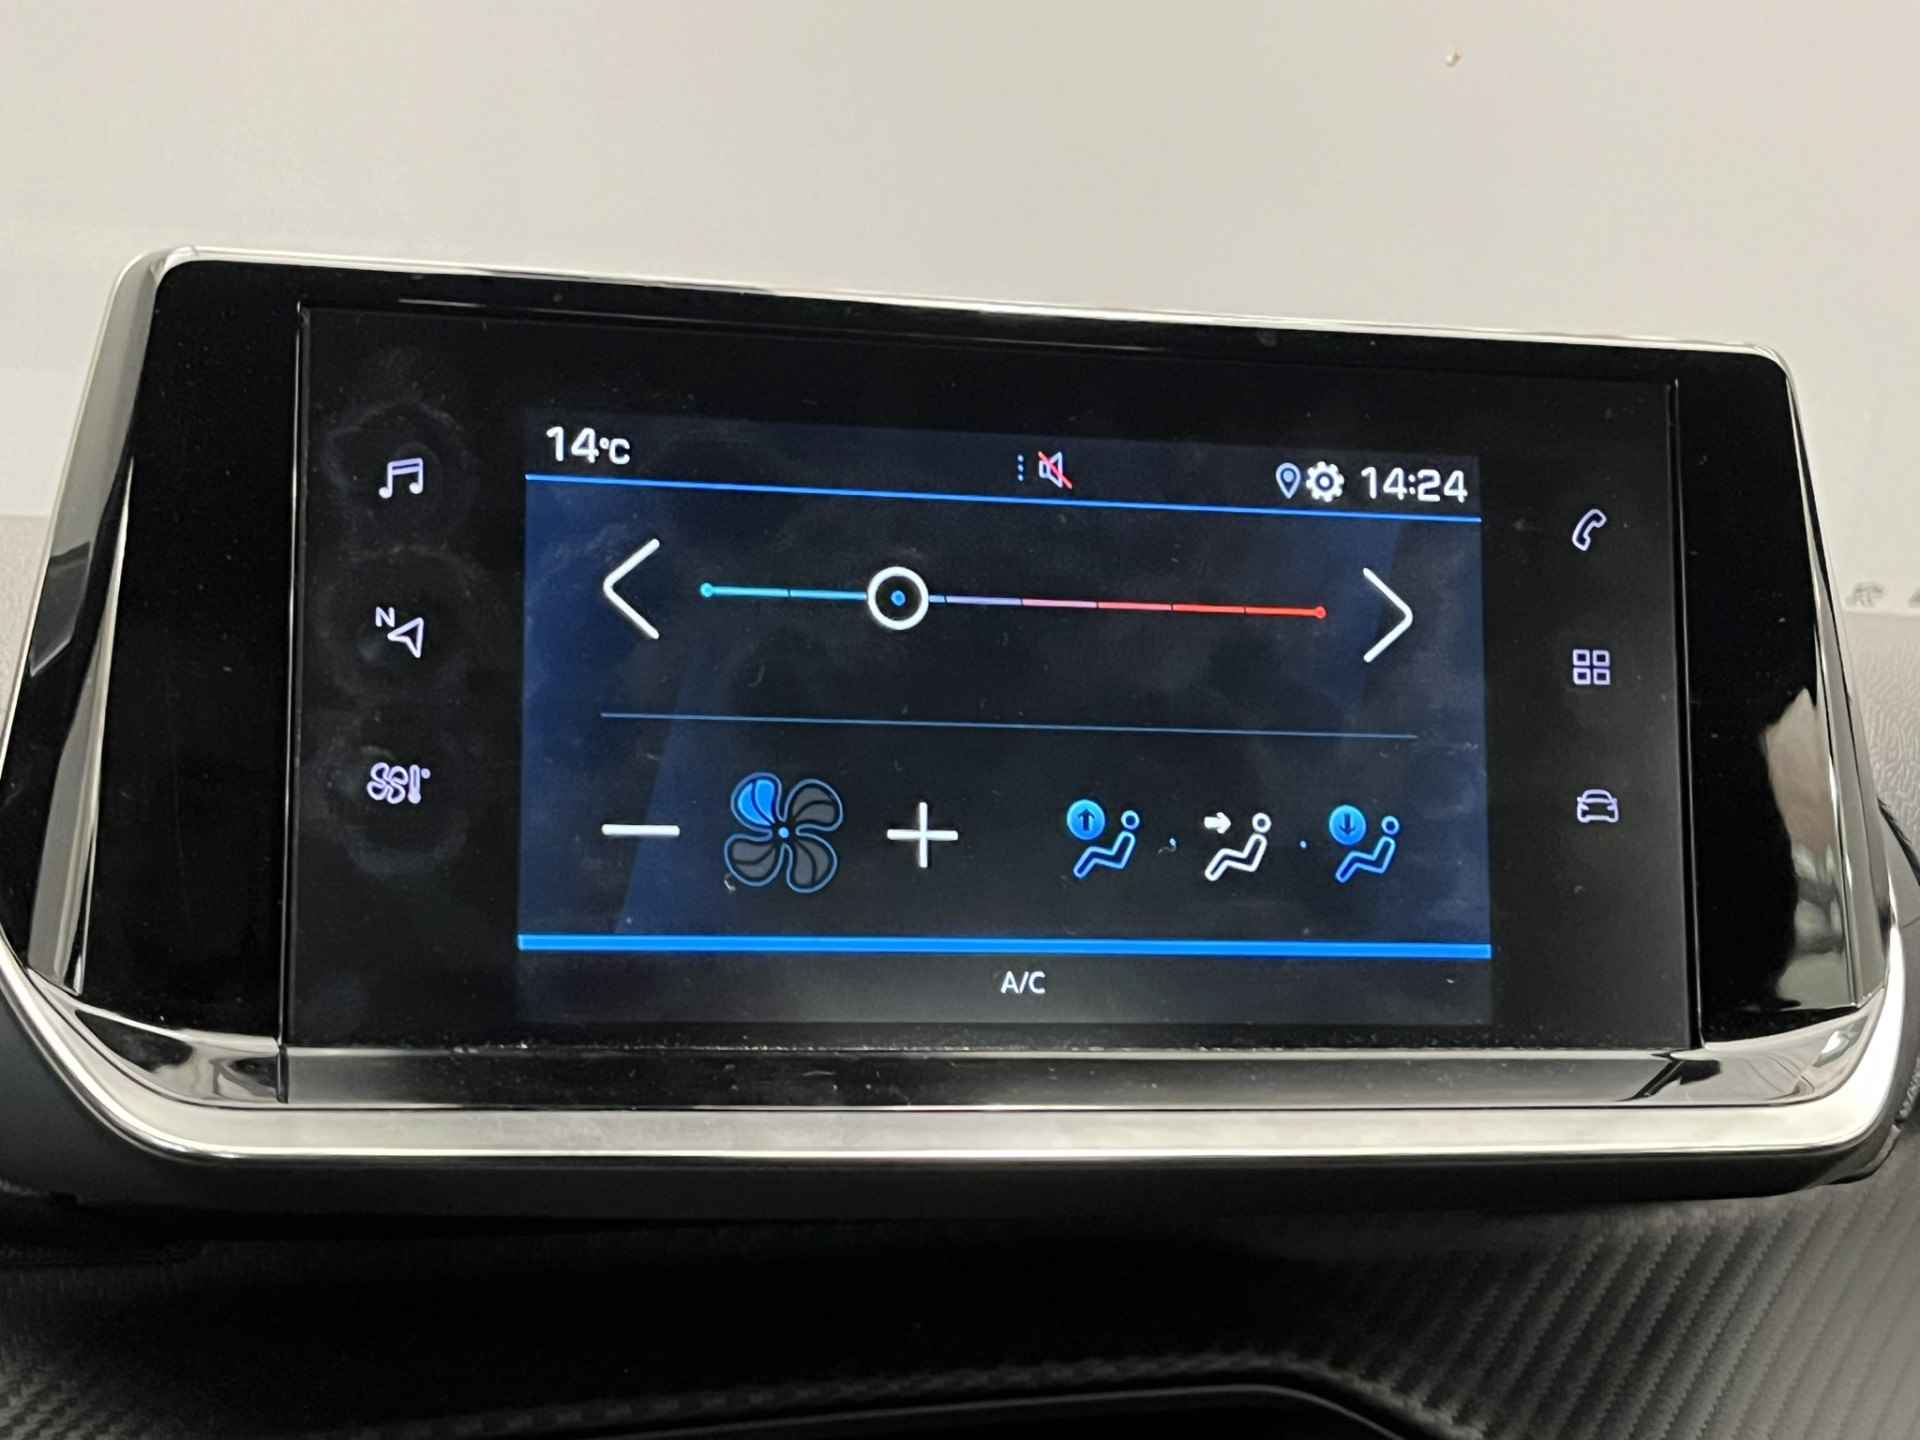 Peugeot 2008 1.2 100PK Active | Parkeersensoren Achter | Apple/Android Carplay | Airco | Cruise | LED | DAB | Bluetooth | Centrale Vergrendeling - 14/32